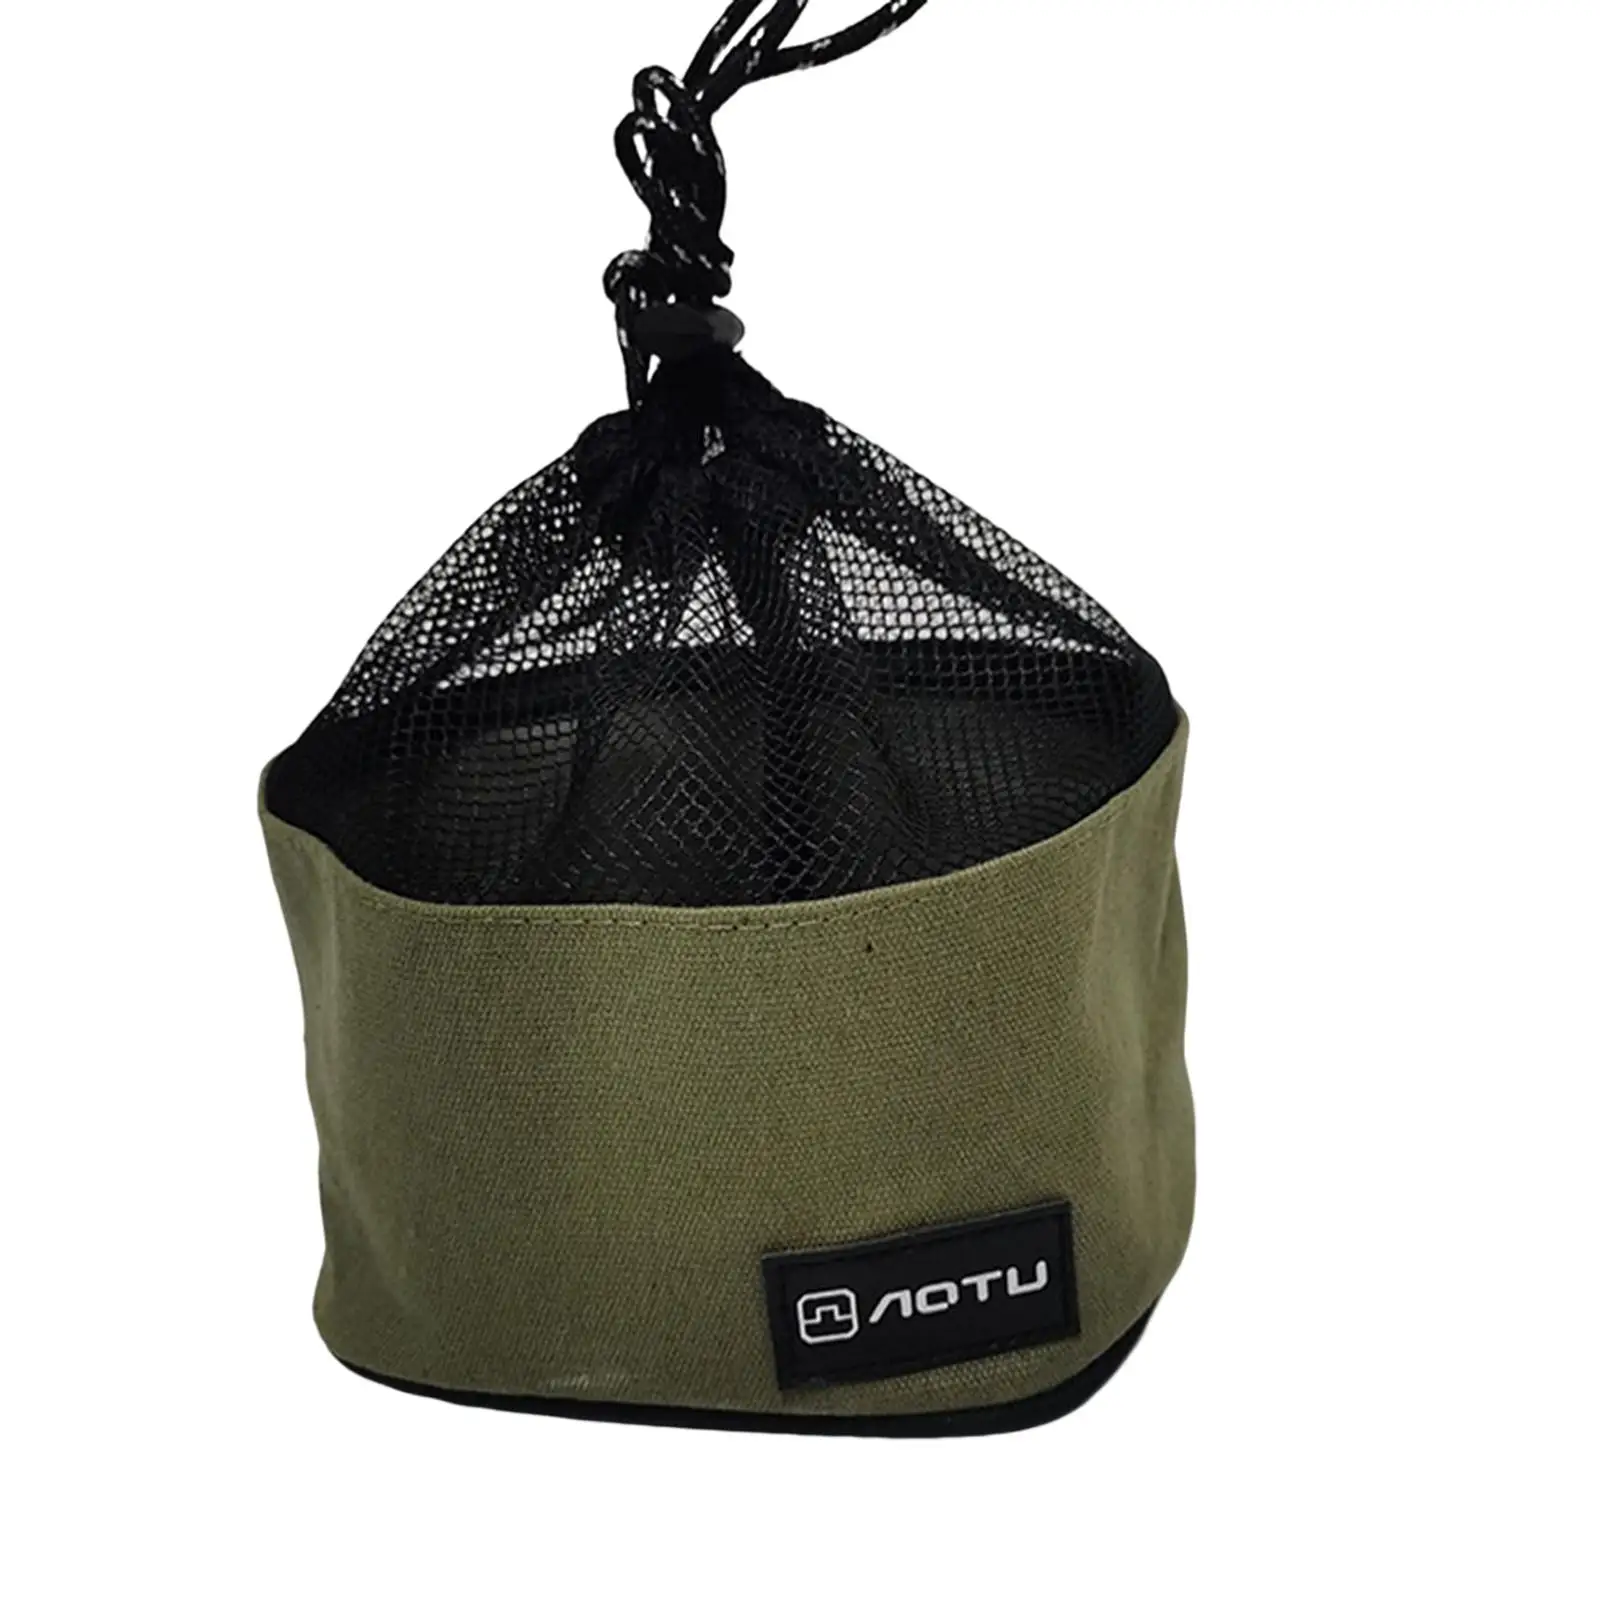 Portable Camping Cookware Storage Bag Drawstring Bag Equipment Case Tableware Storage for Outdoor BBQ Barbecue Picnic Travel